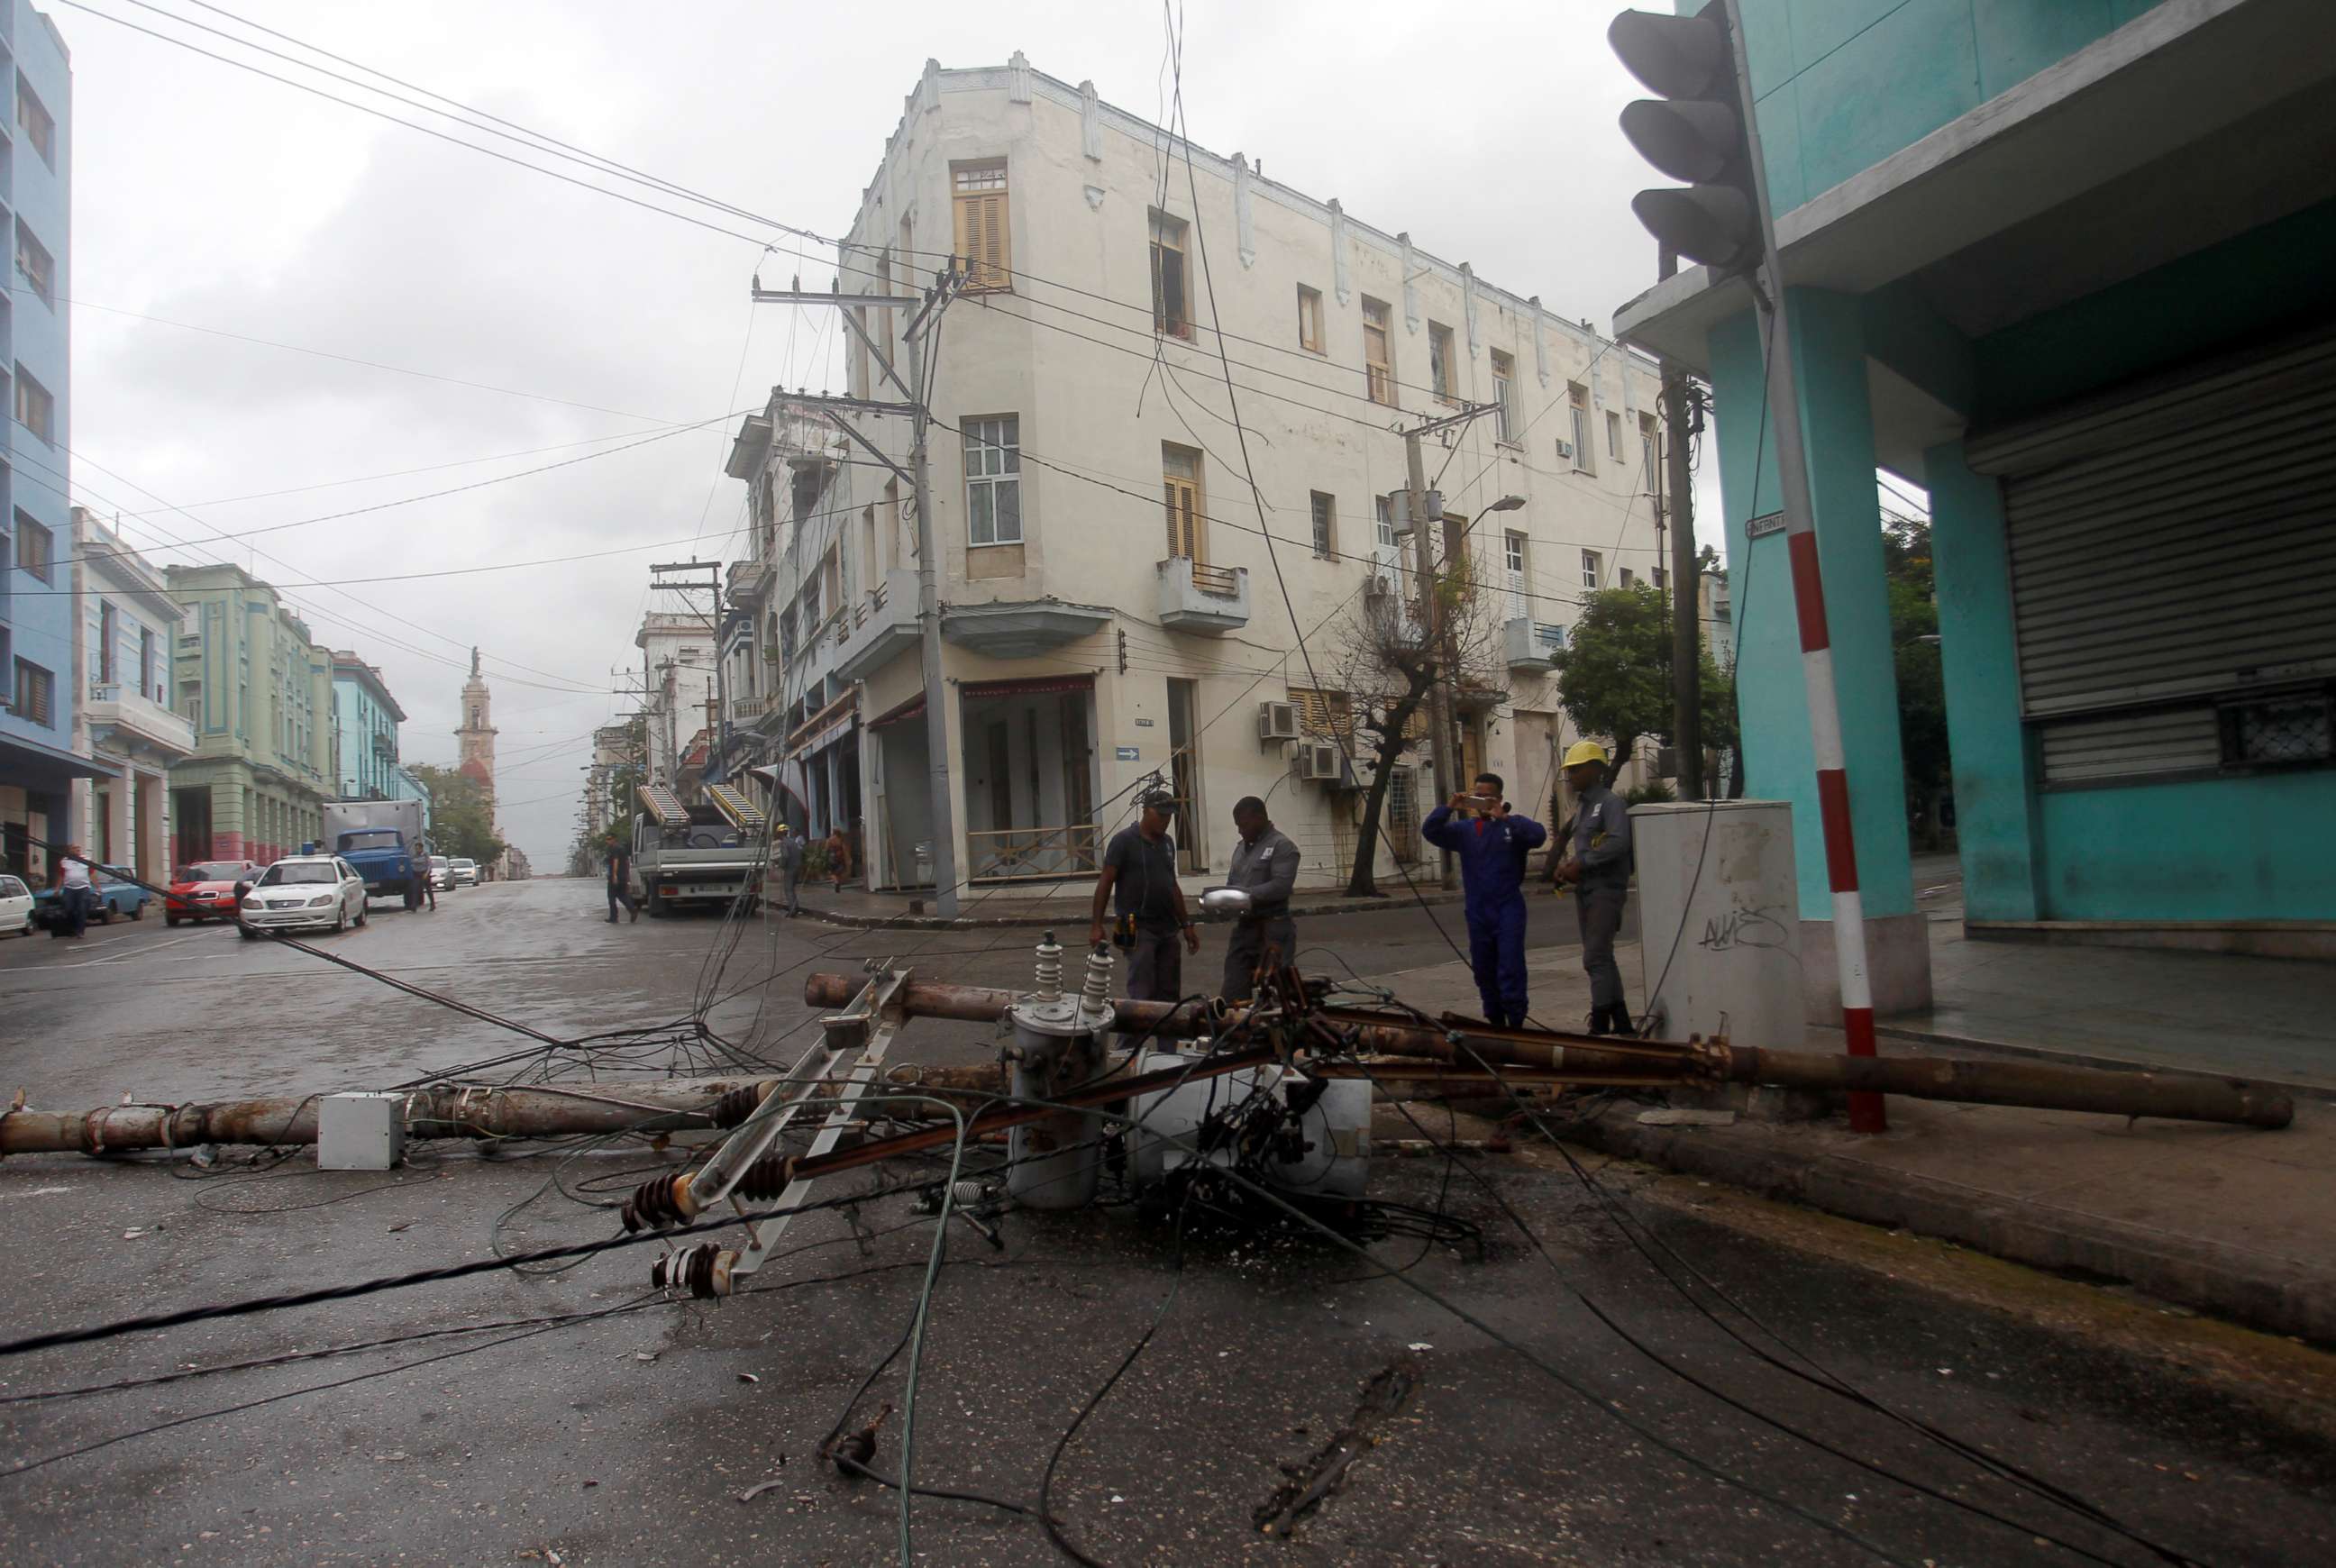 PHOTO: Workers stand near an electricity pole that was knocked down by heavy winds, ahead of the passing of Hurricane Irma, in Havana, Cuba, Sept. 9, 2017. 